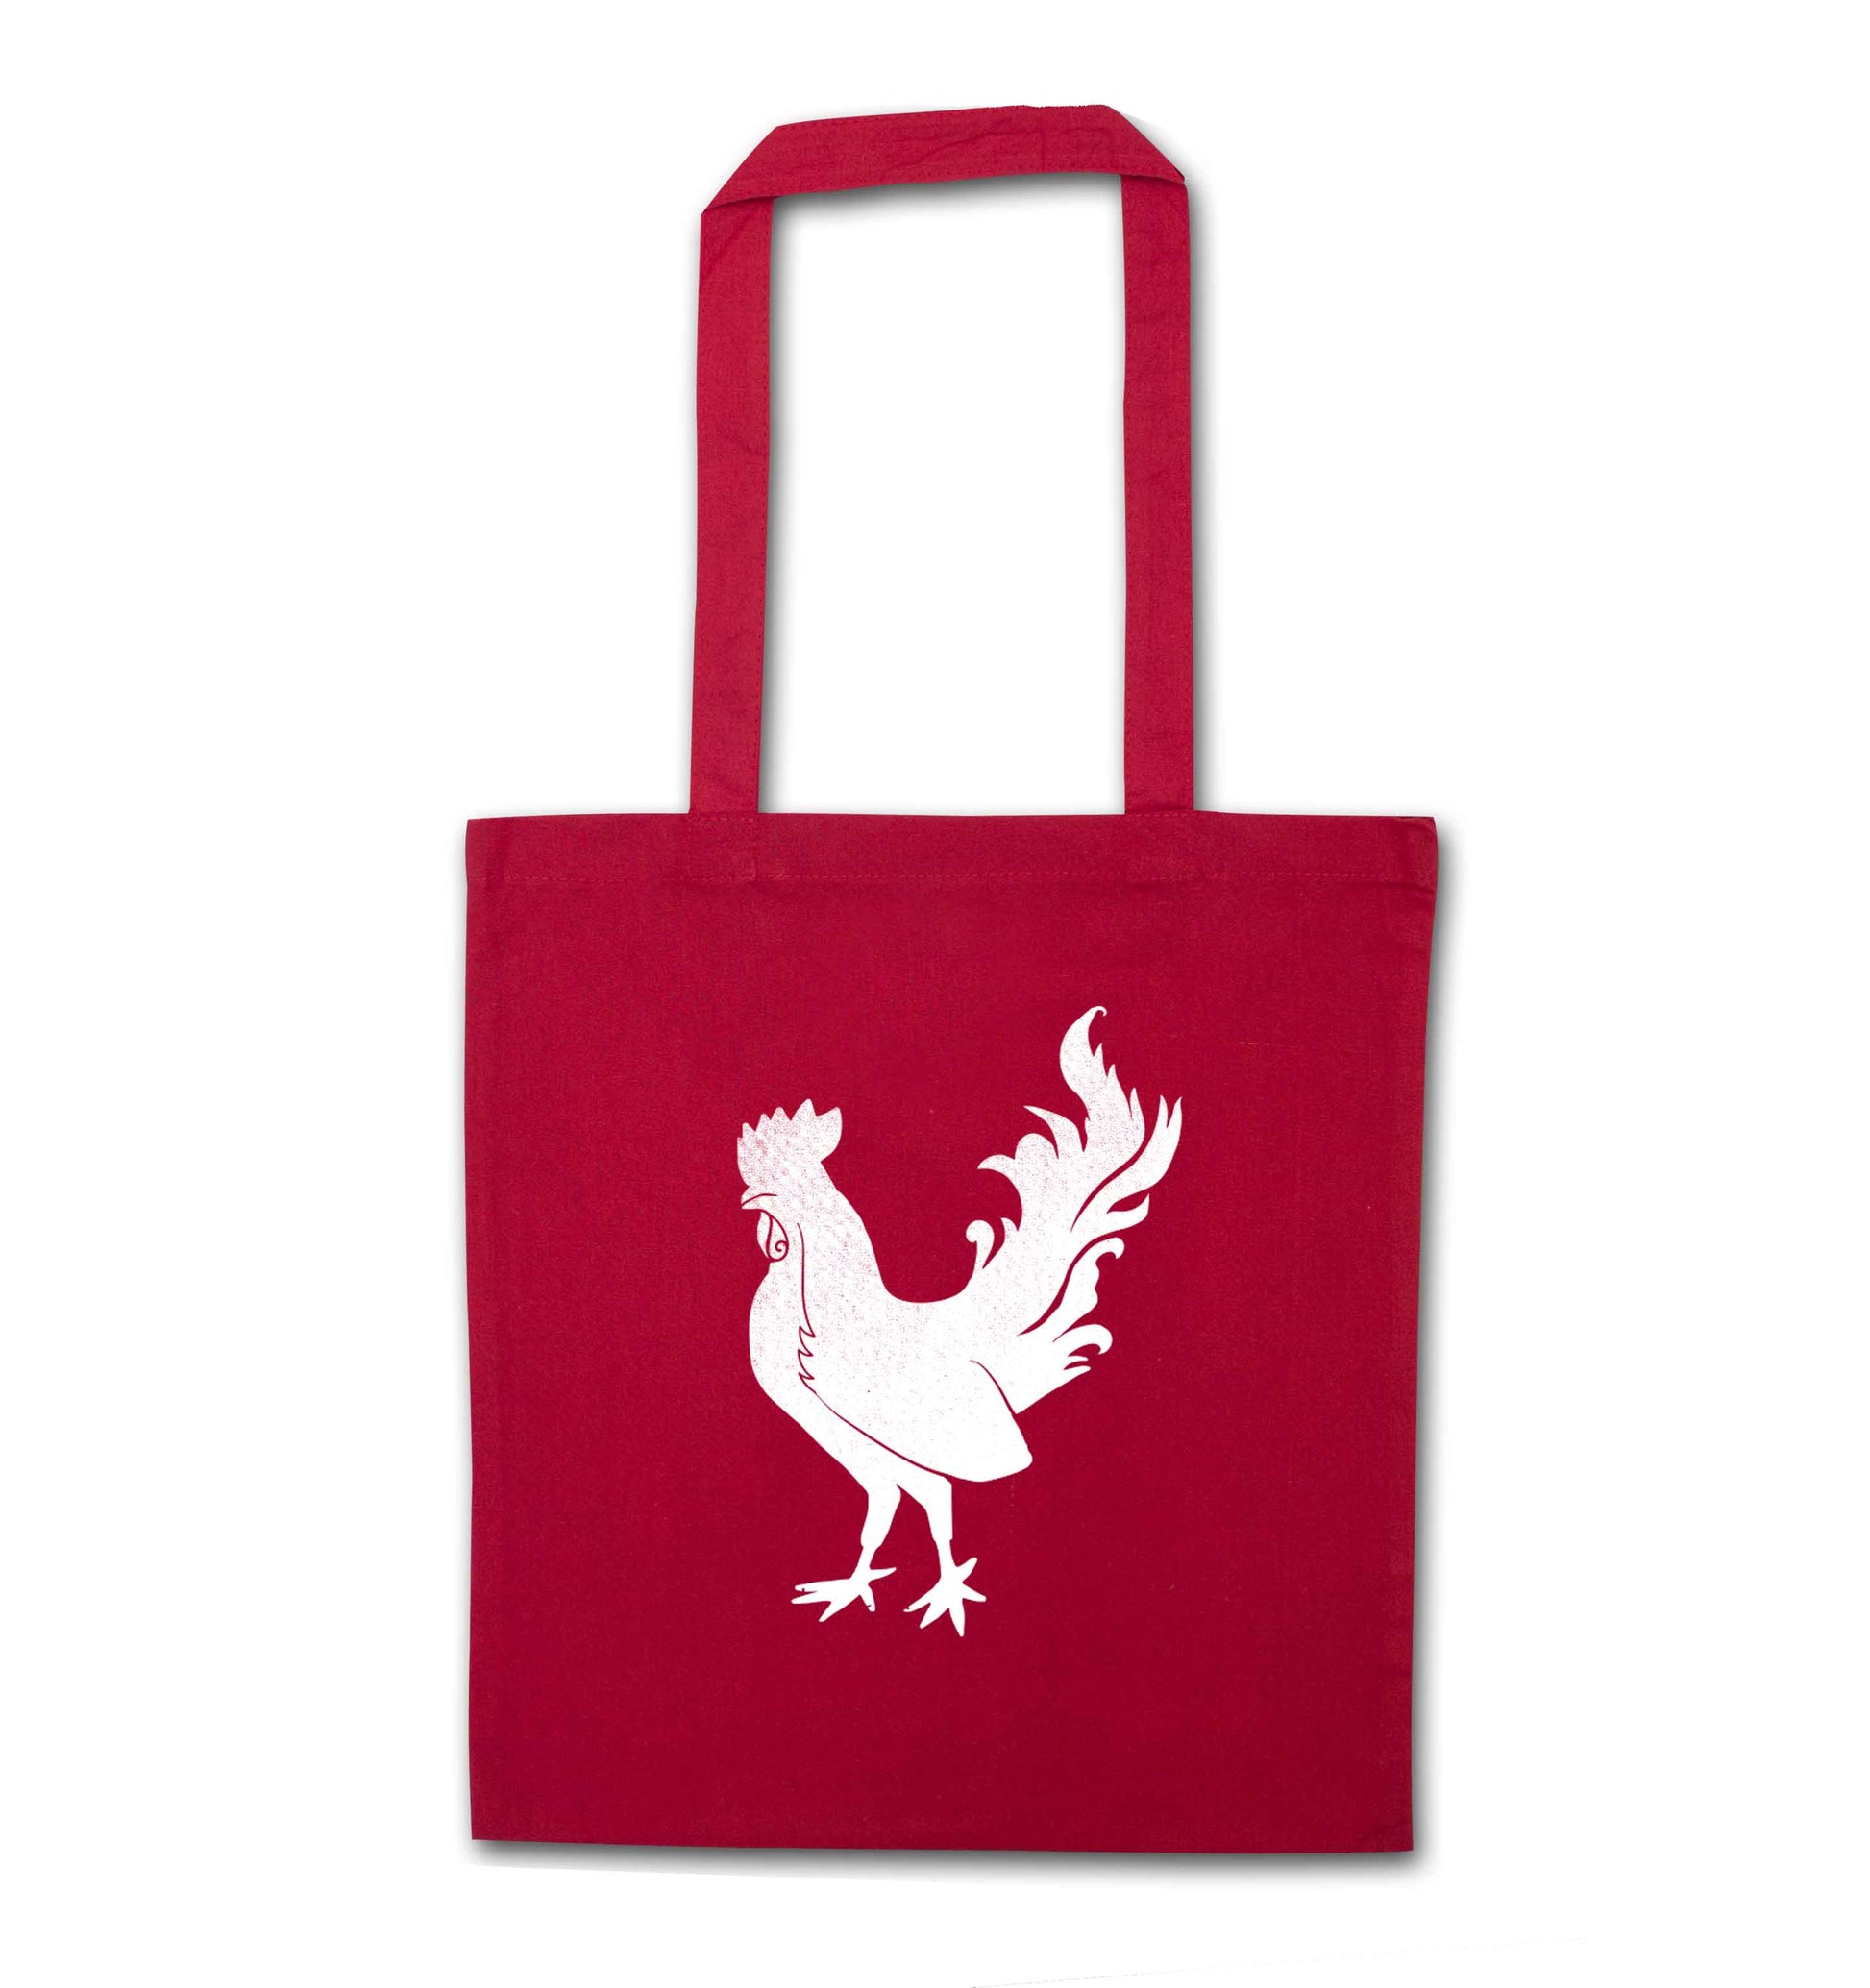 Rooster red tote bag